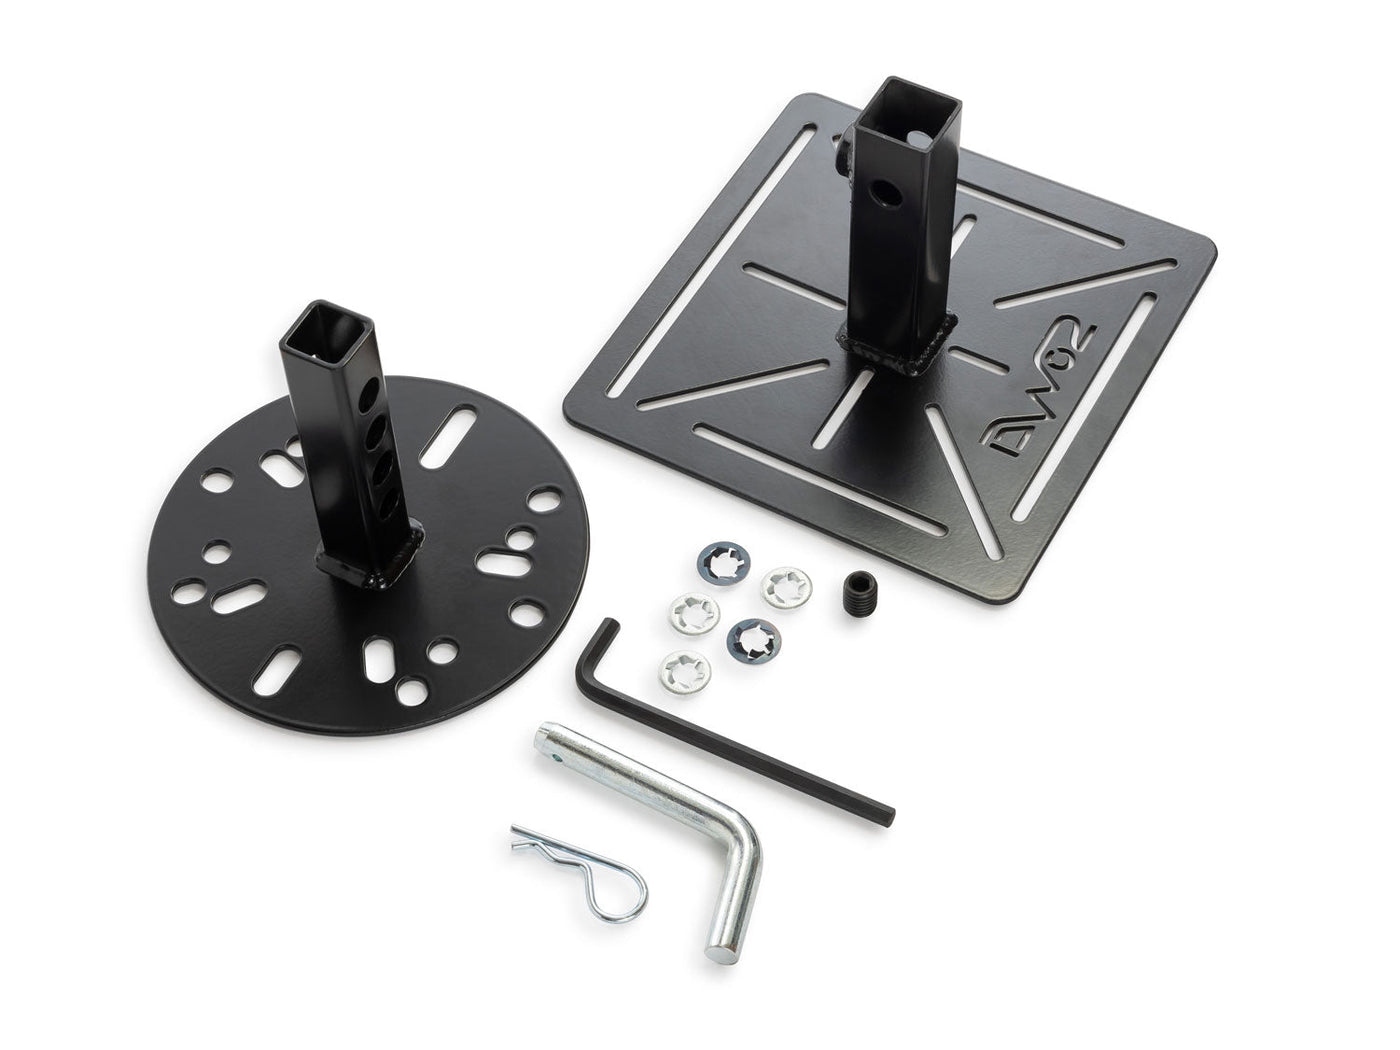 Spare Tire Adapter for Shovel Mounts